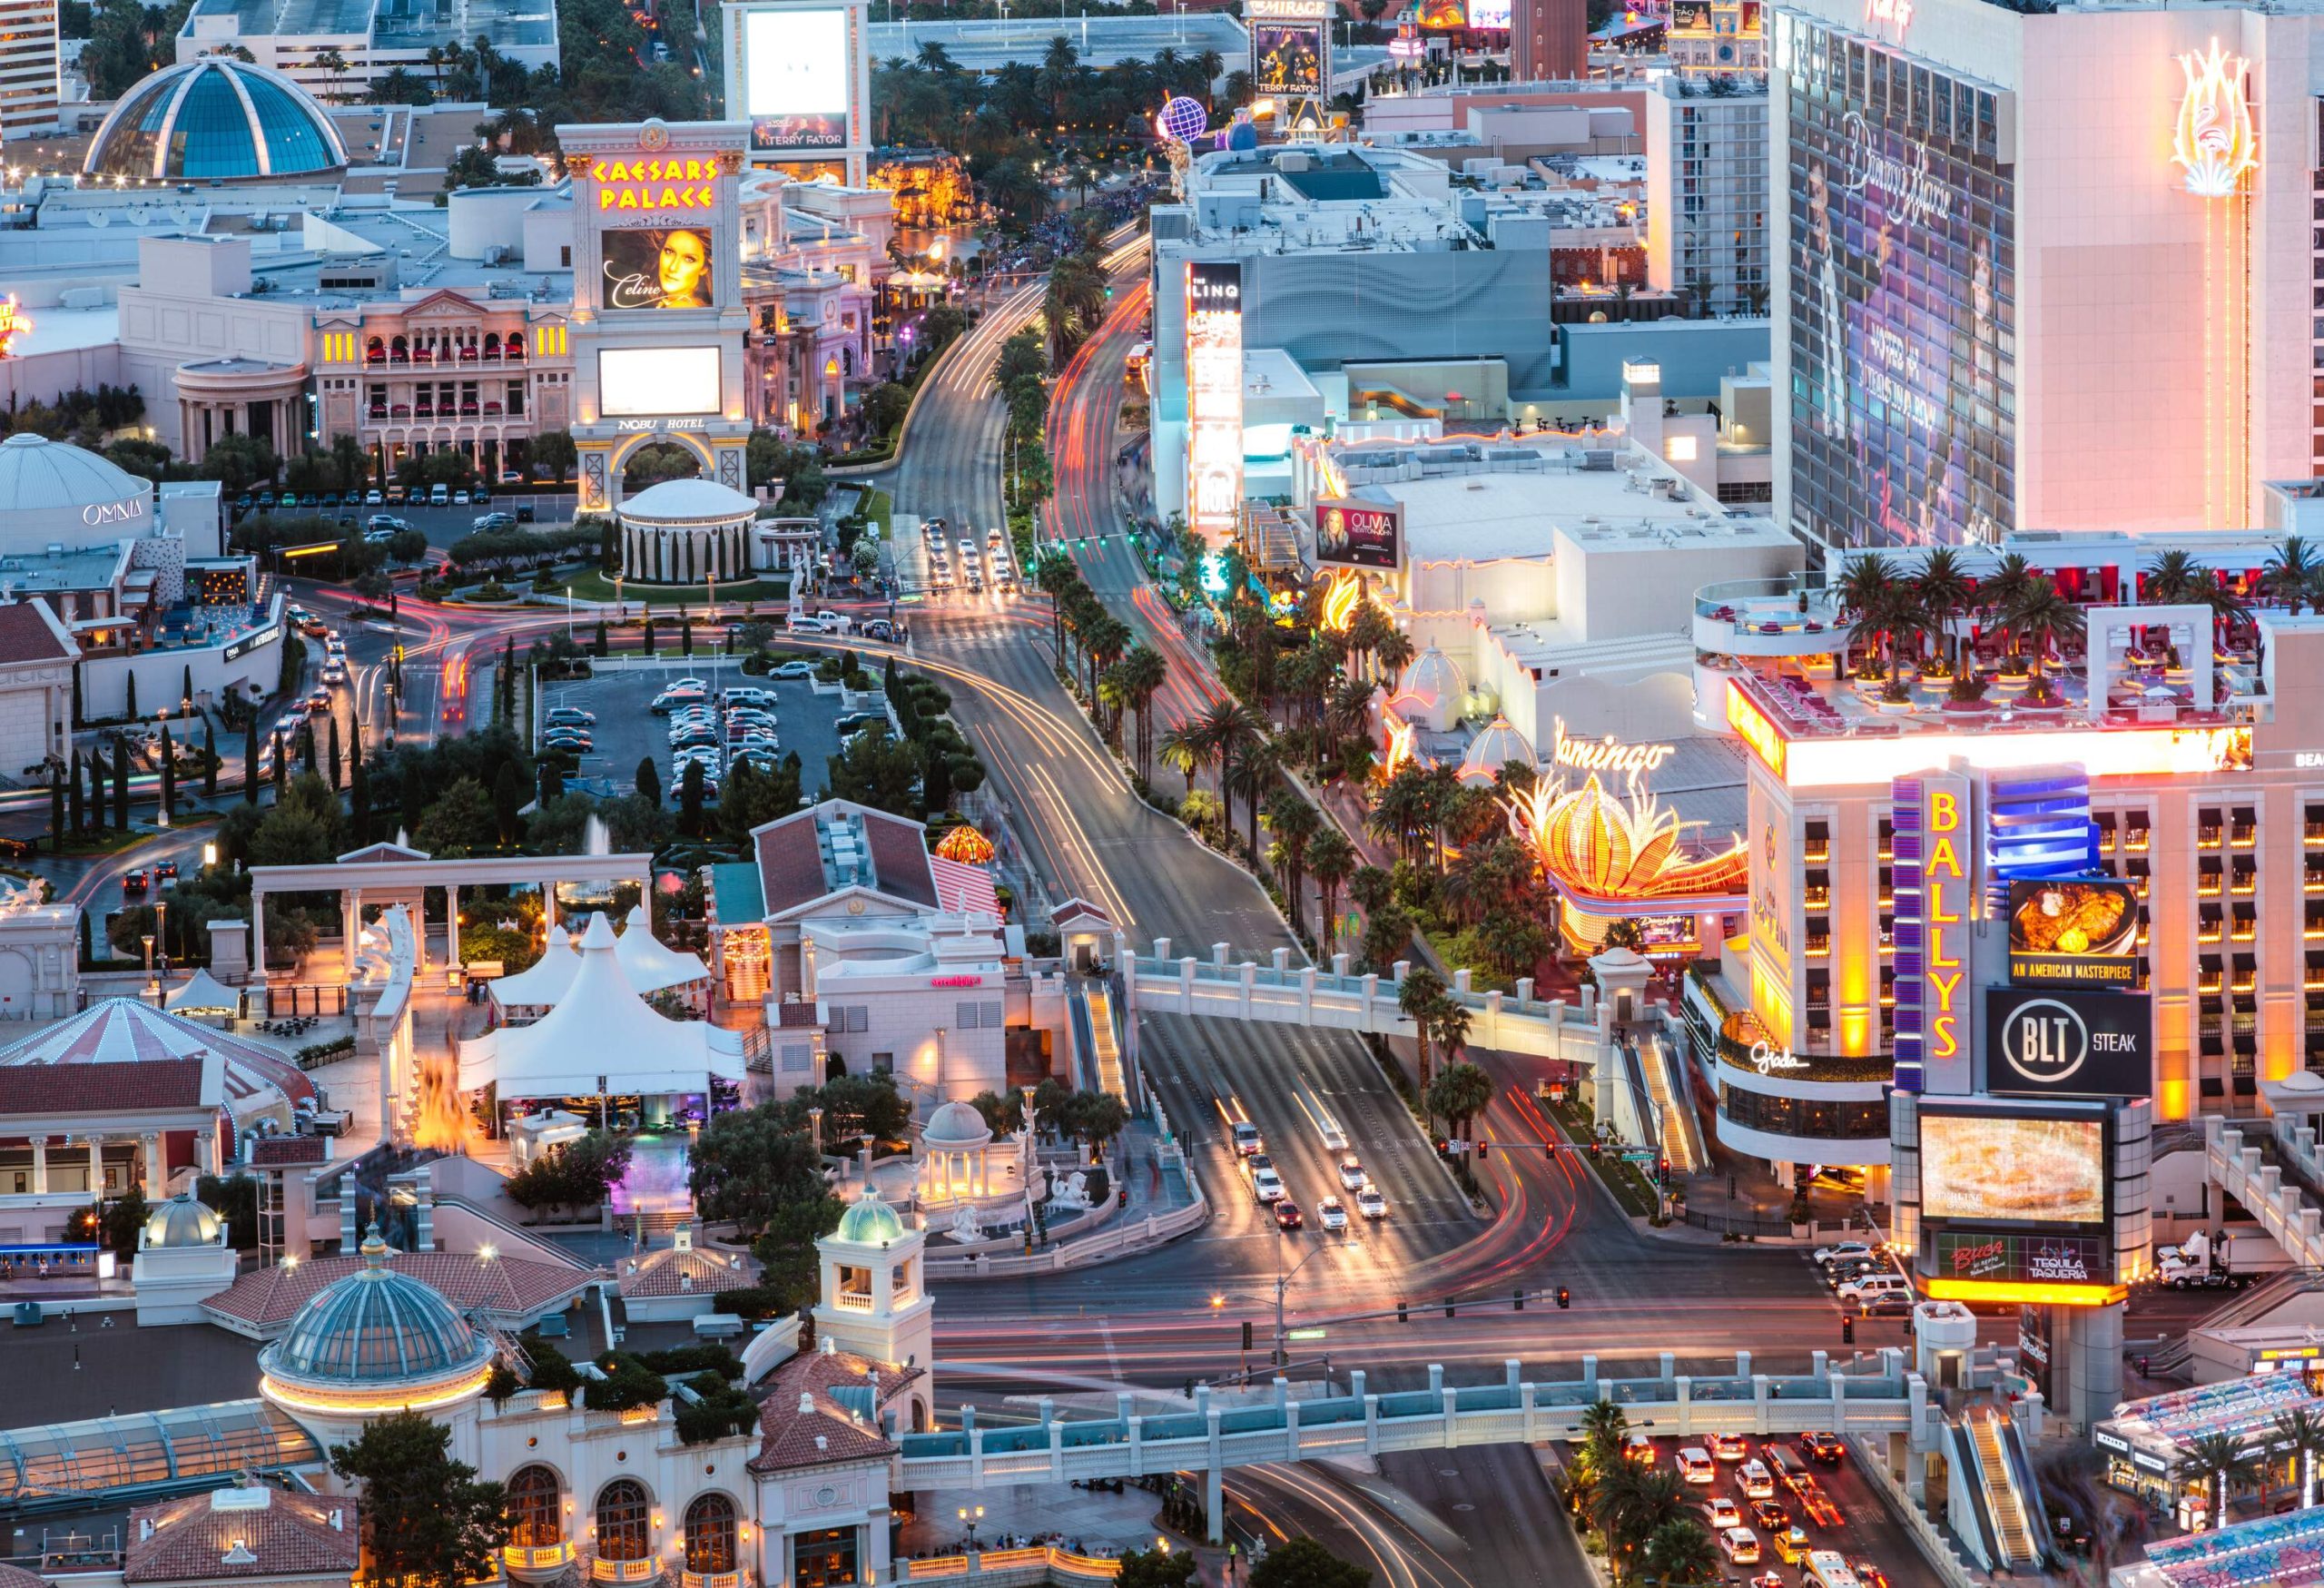 The lively landscape of The Strip in Las Vegas dotted with entertainment venues and hotel complexes.